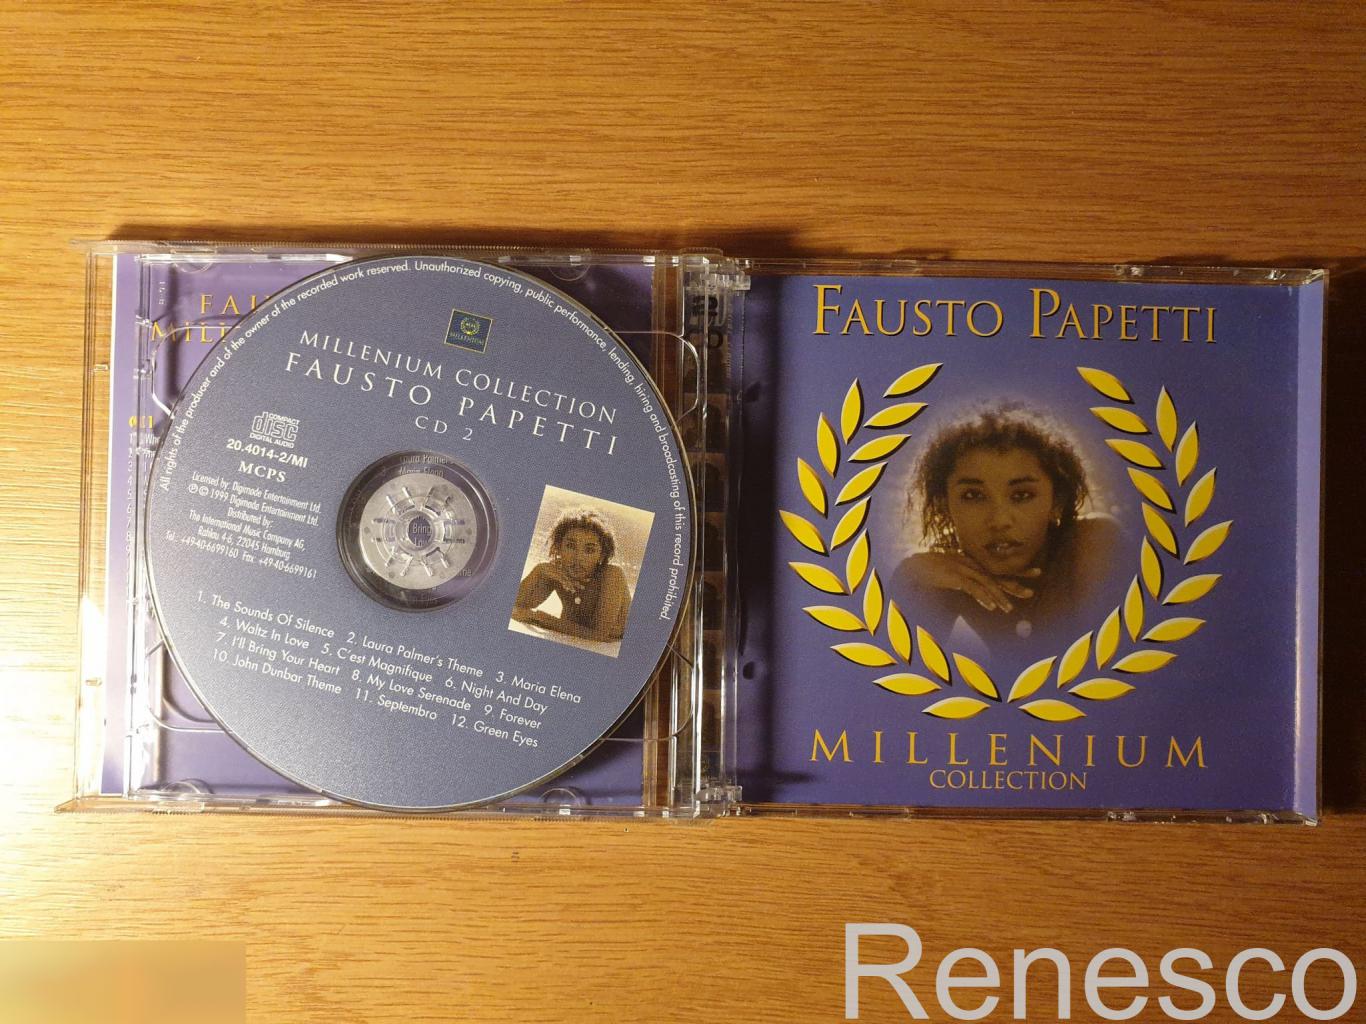 (2CD) Fausto Papetti - Millenium Collection (1999) (Germany) 5